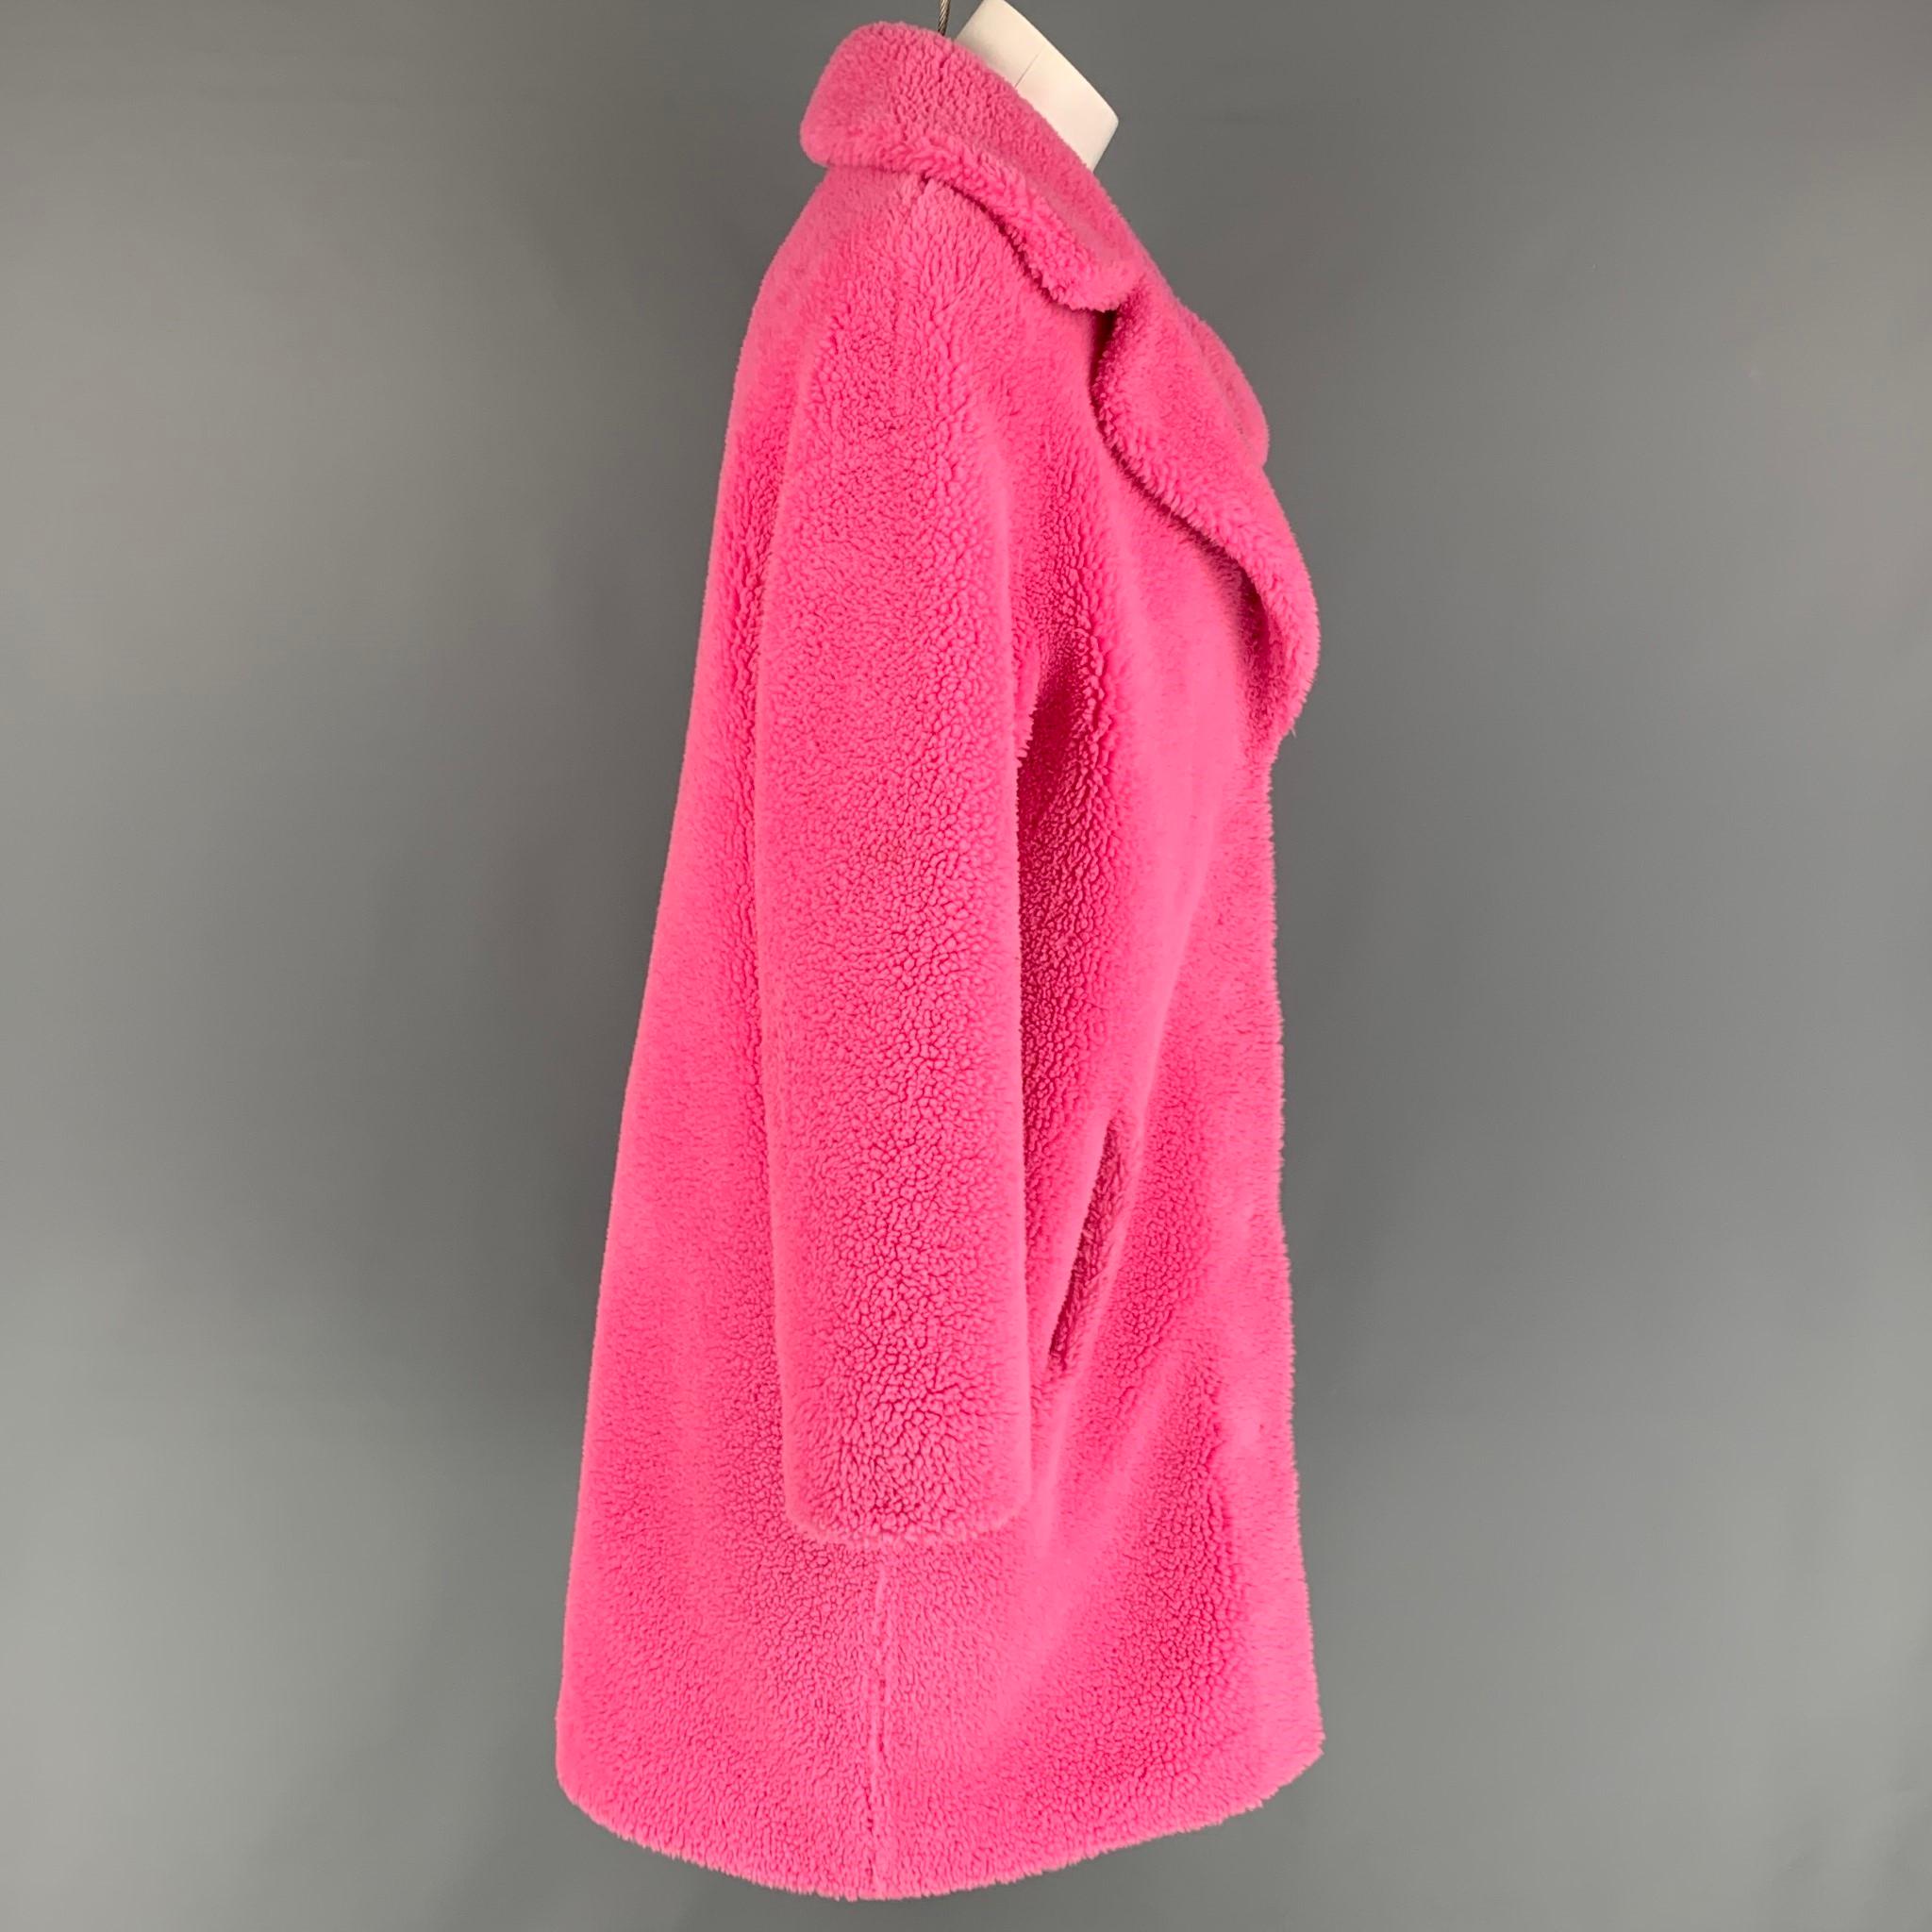 STAND STUDIO coat comes in a pink faux fur featuring a notch lapel, slit pockets, and a hidden snap button closure. 

Very Good Pre-Owned Condition.
Marked: 40

Measurements:

Shoulder: 22 in.
Bust: 40 in.
Sleeve: 21 in.
Length: 39 in. 